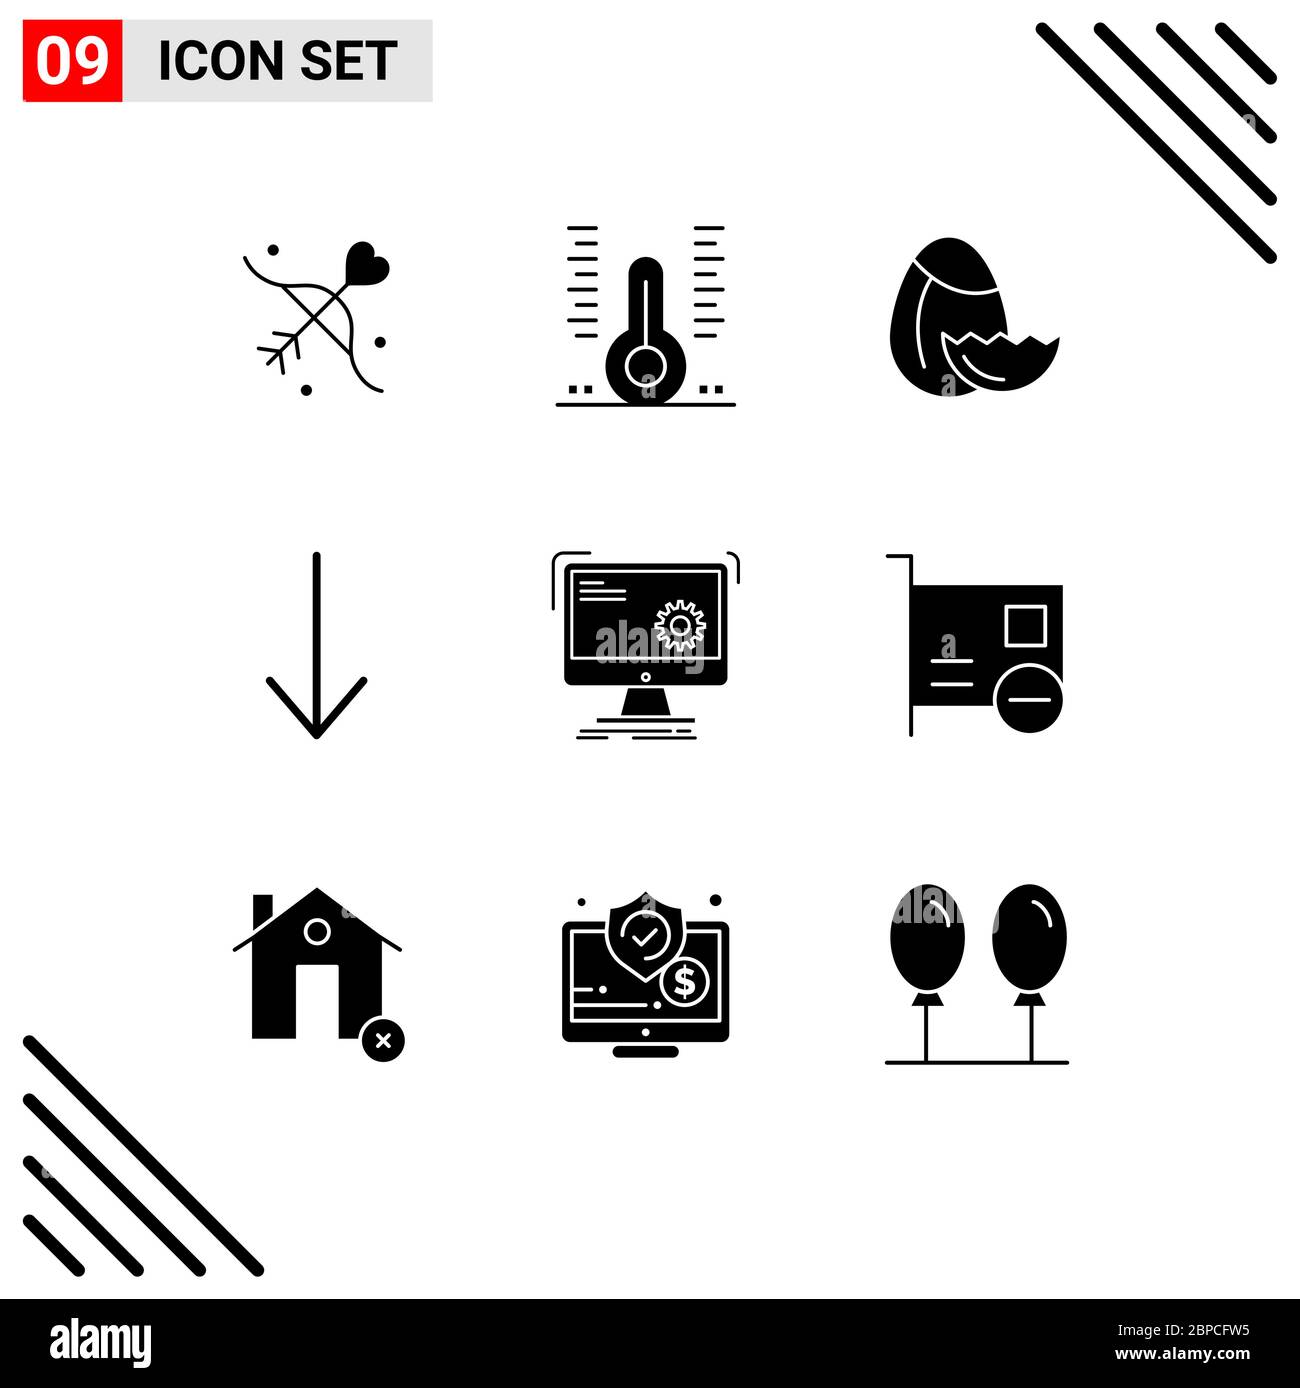 Pictogram Set of 9 Simple Solid Glyphs of process, computer, thermometer, command, arrow Editable Vector Design Elements Stock Vector